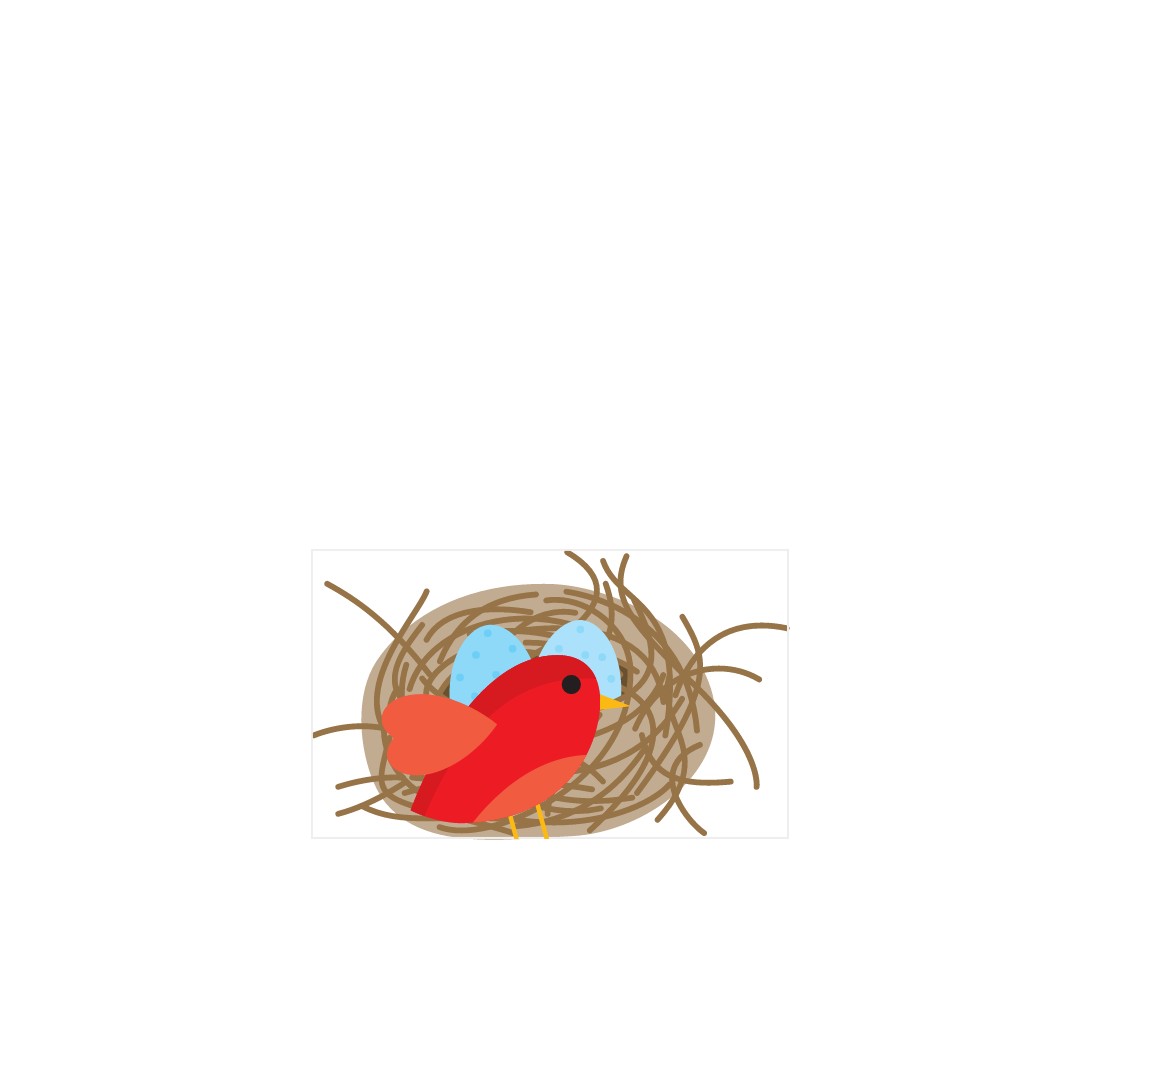 A visual respresentation of the nested svg element positioned on top of (or around) the nest, with the bird positioned inside of it.